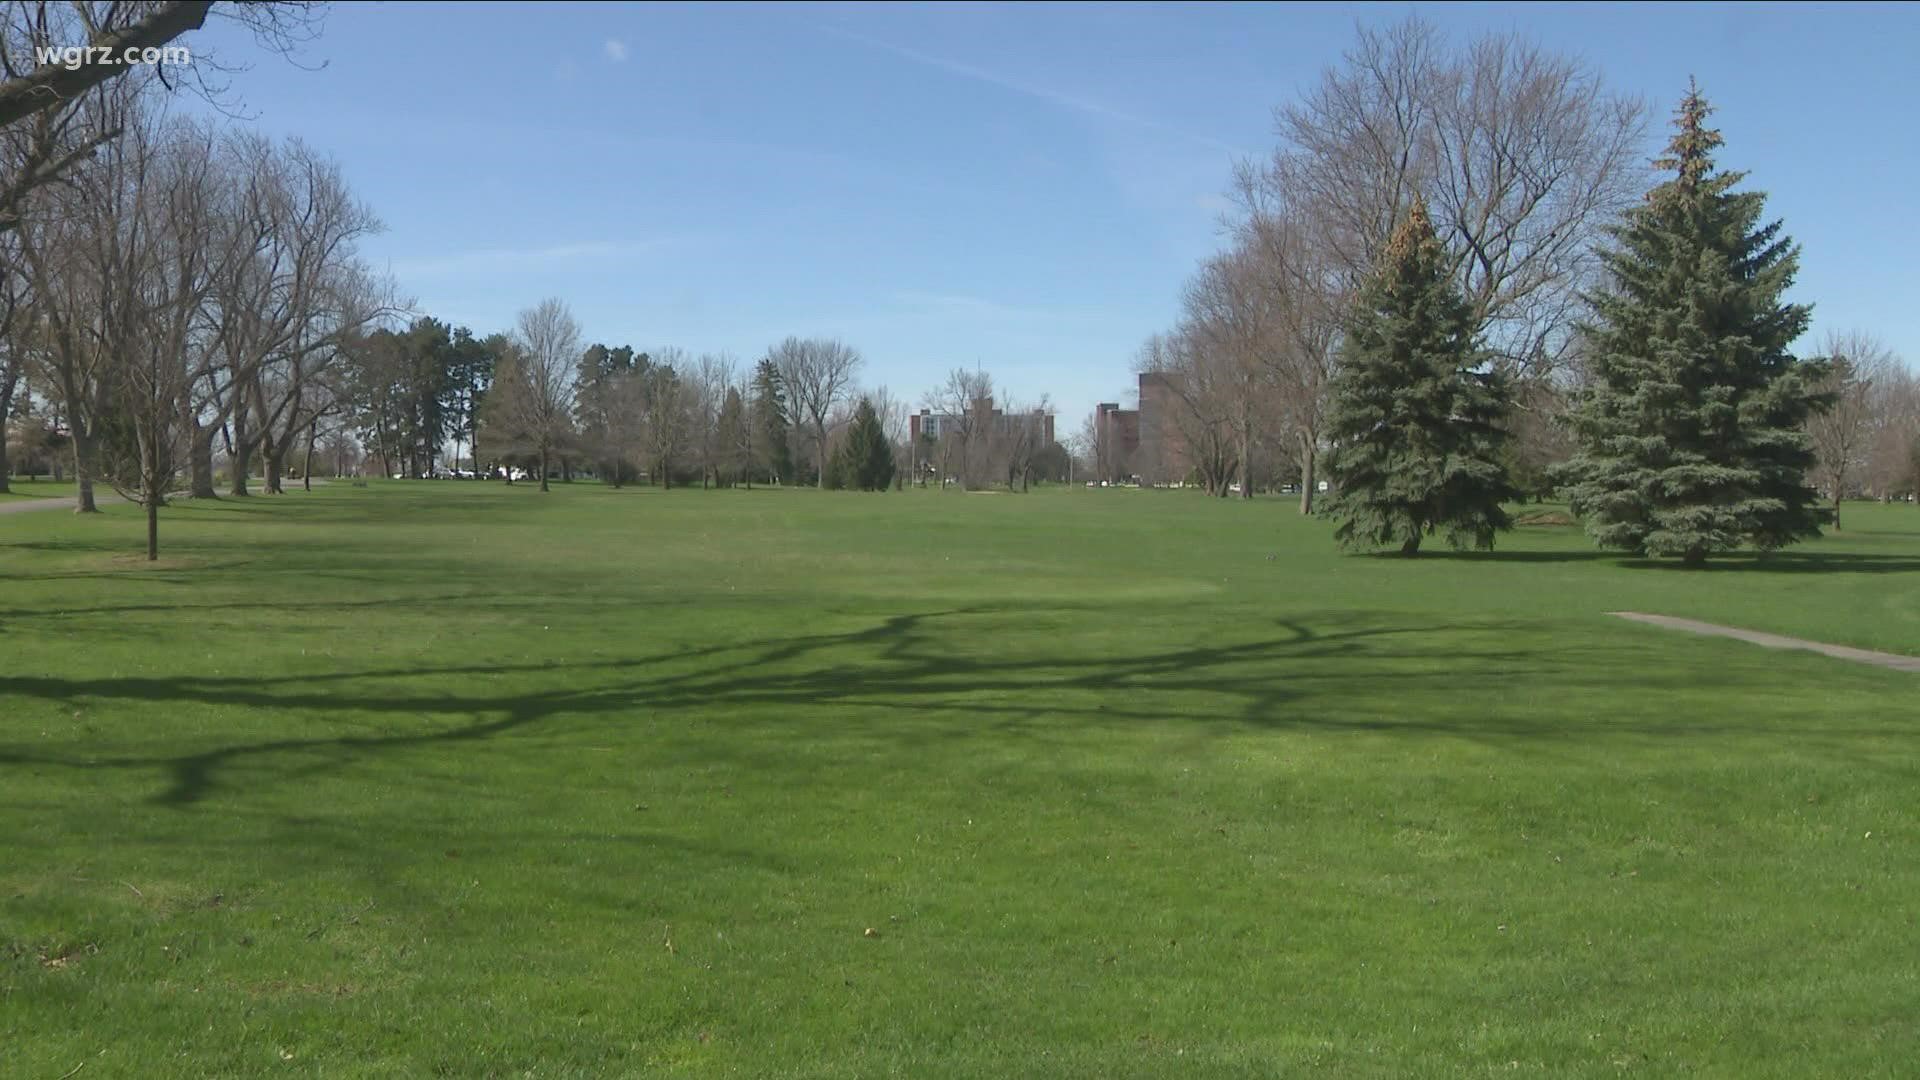 Golf courses plan on opening soon, if the weather cooperates | wgrz.com